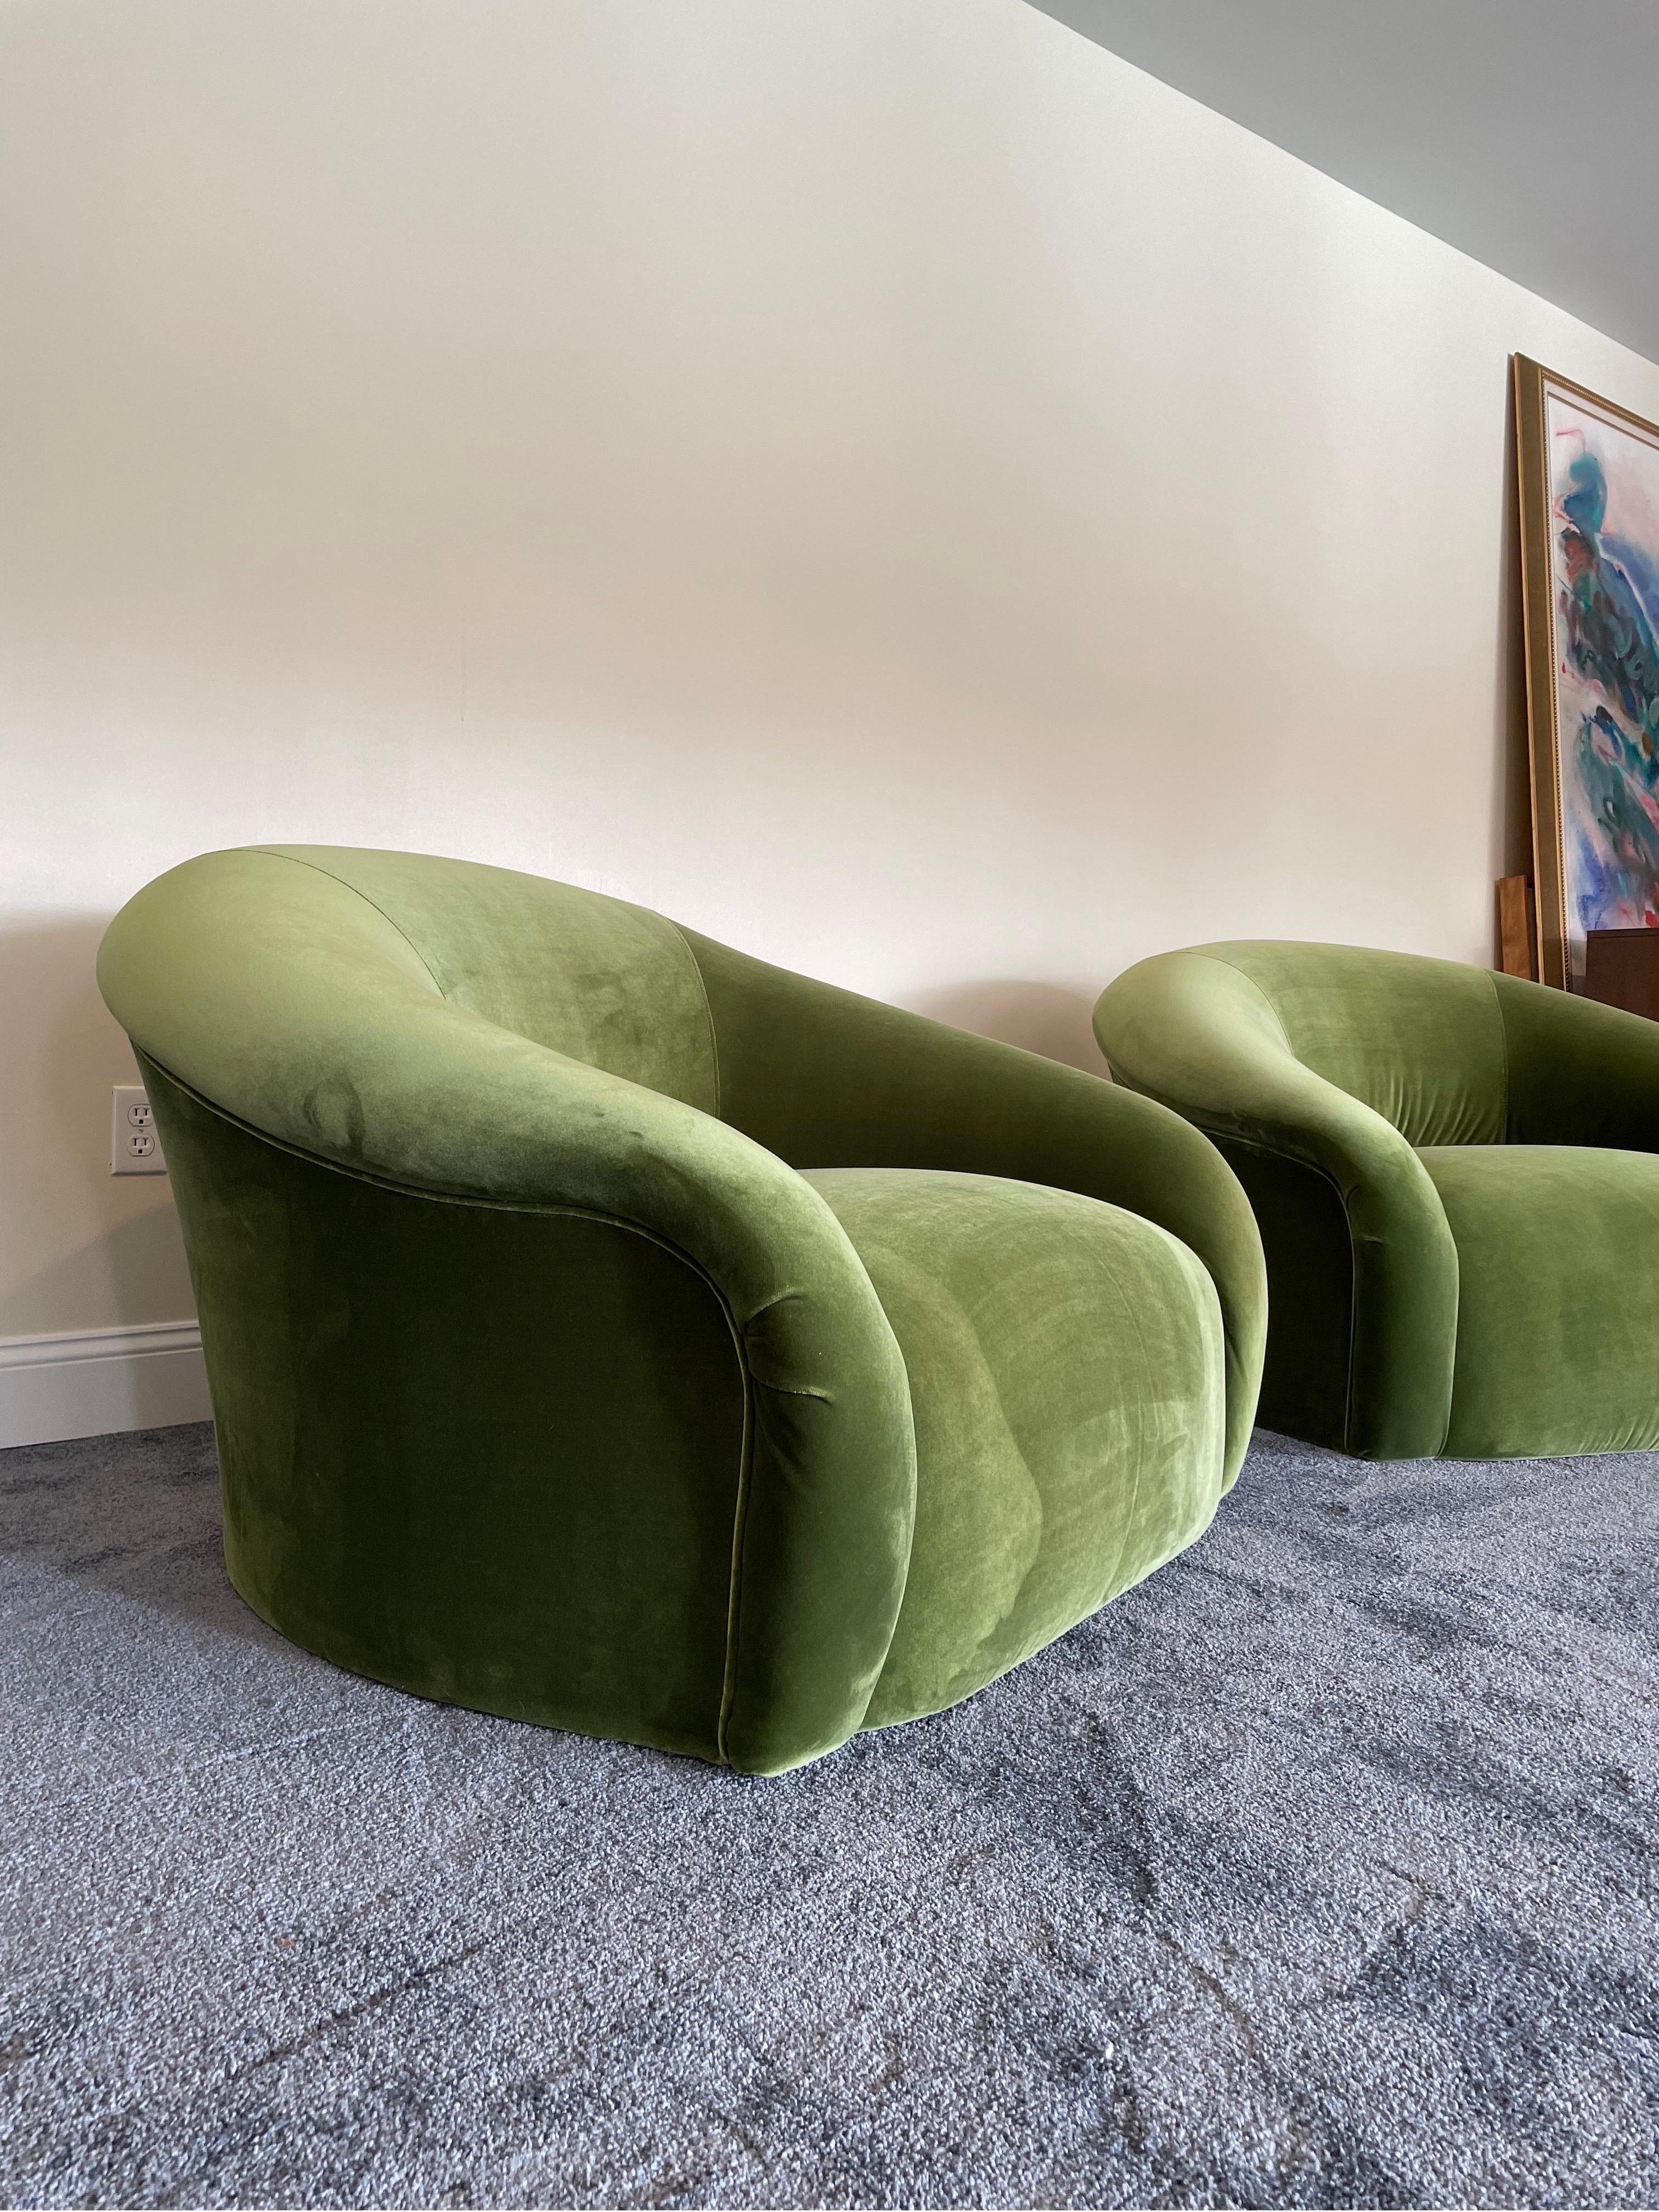 A pair of oversized lounge chairs by Sally Sirkin Lewis for J. Robert Scott beautifully redone in luxurious moss green velvet. Feeling a little Royere, a little Kagan, and a lot comfortable. Chairs are on hidden castors for extra convenience.